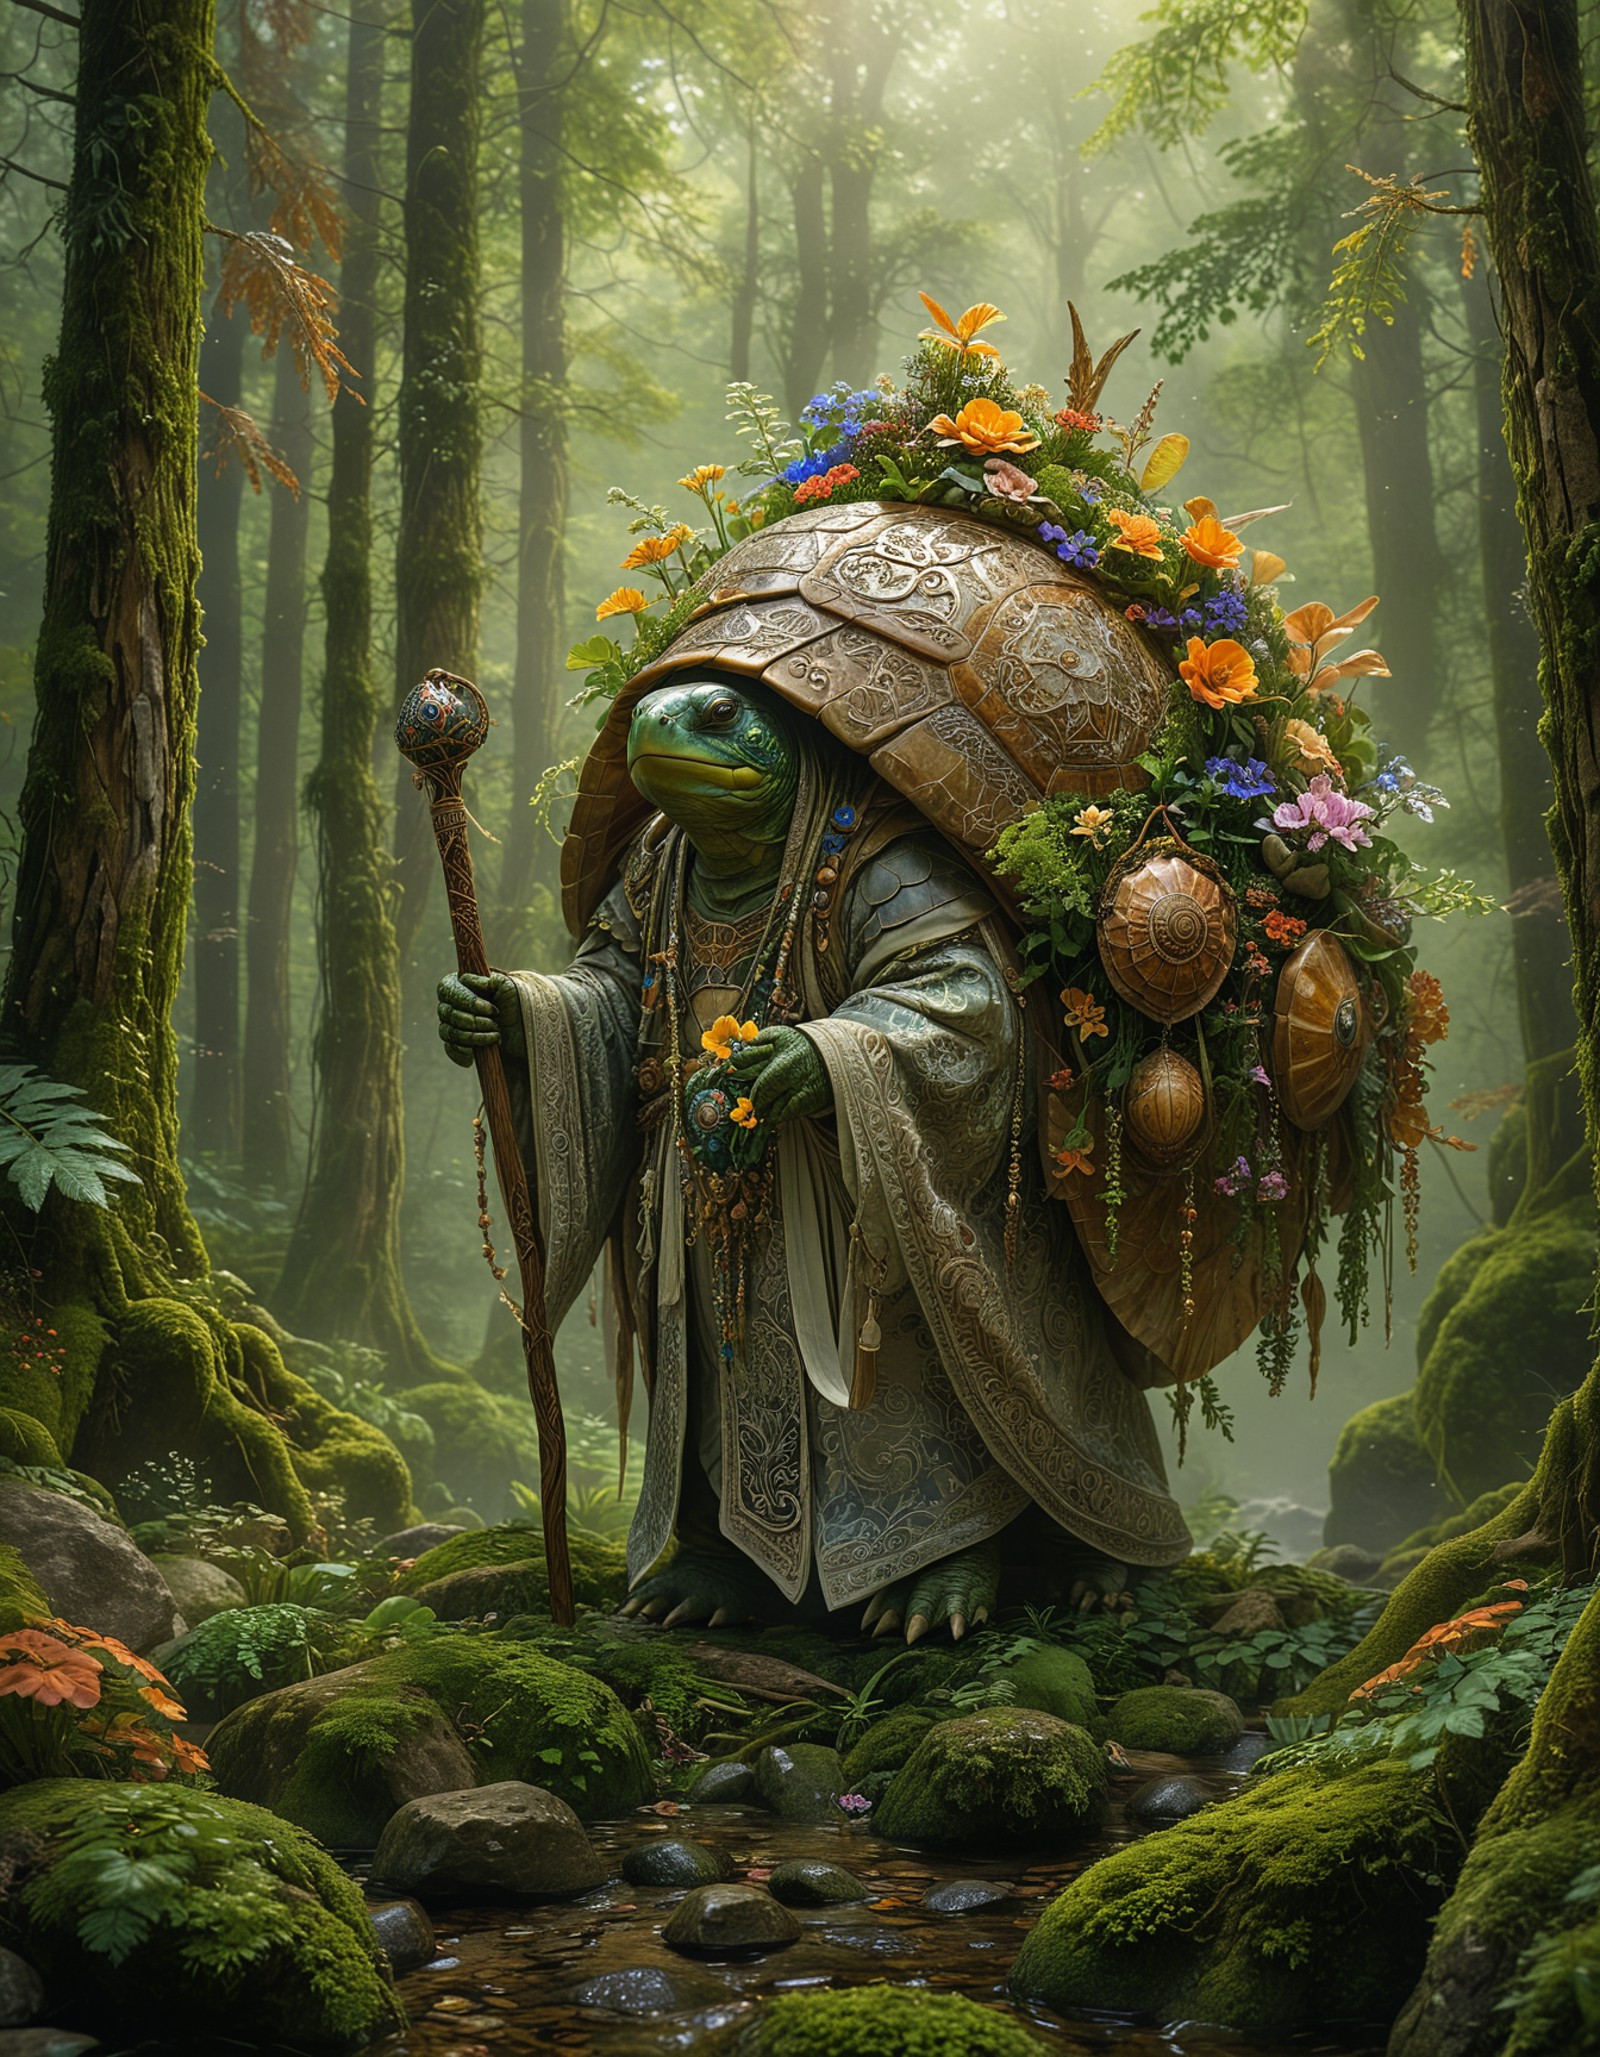 An anthropomorphic turtle standing amidst a forest draped in ornate robes and bearing a staff. Its shell is adorned with an array of vibrant flowers and foliage. 